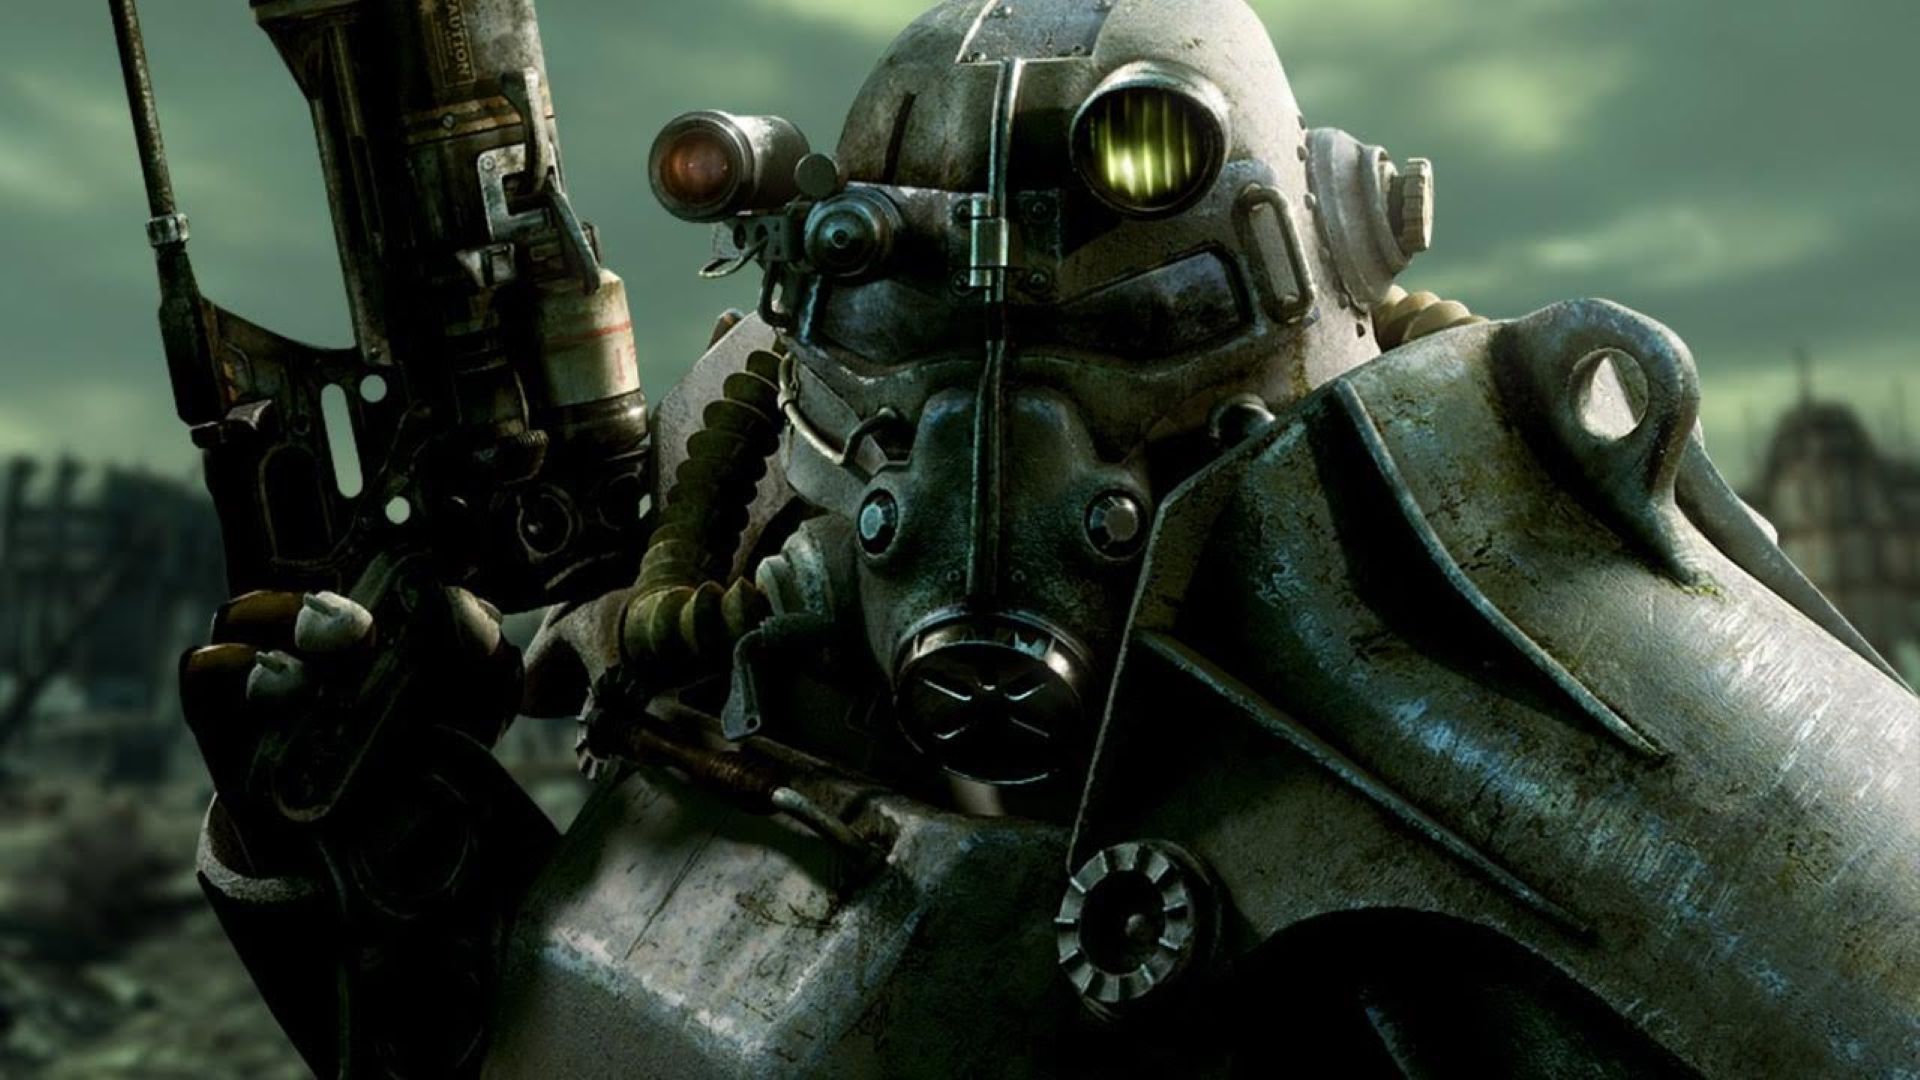 Fallout TV Show Cast, Plot & All We Know